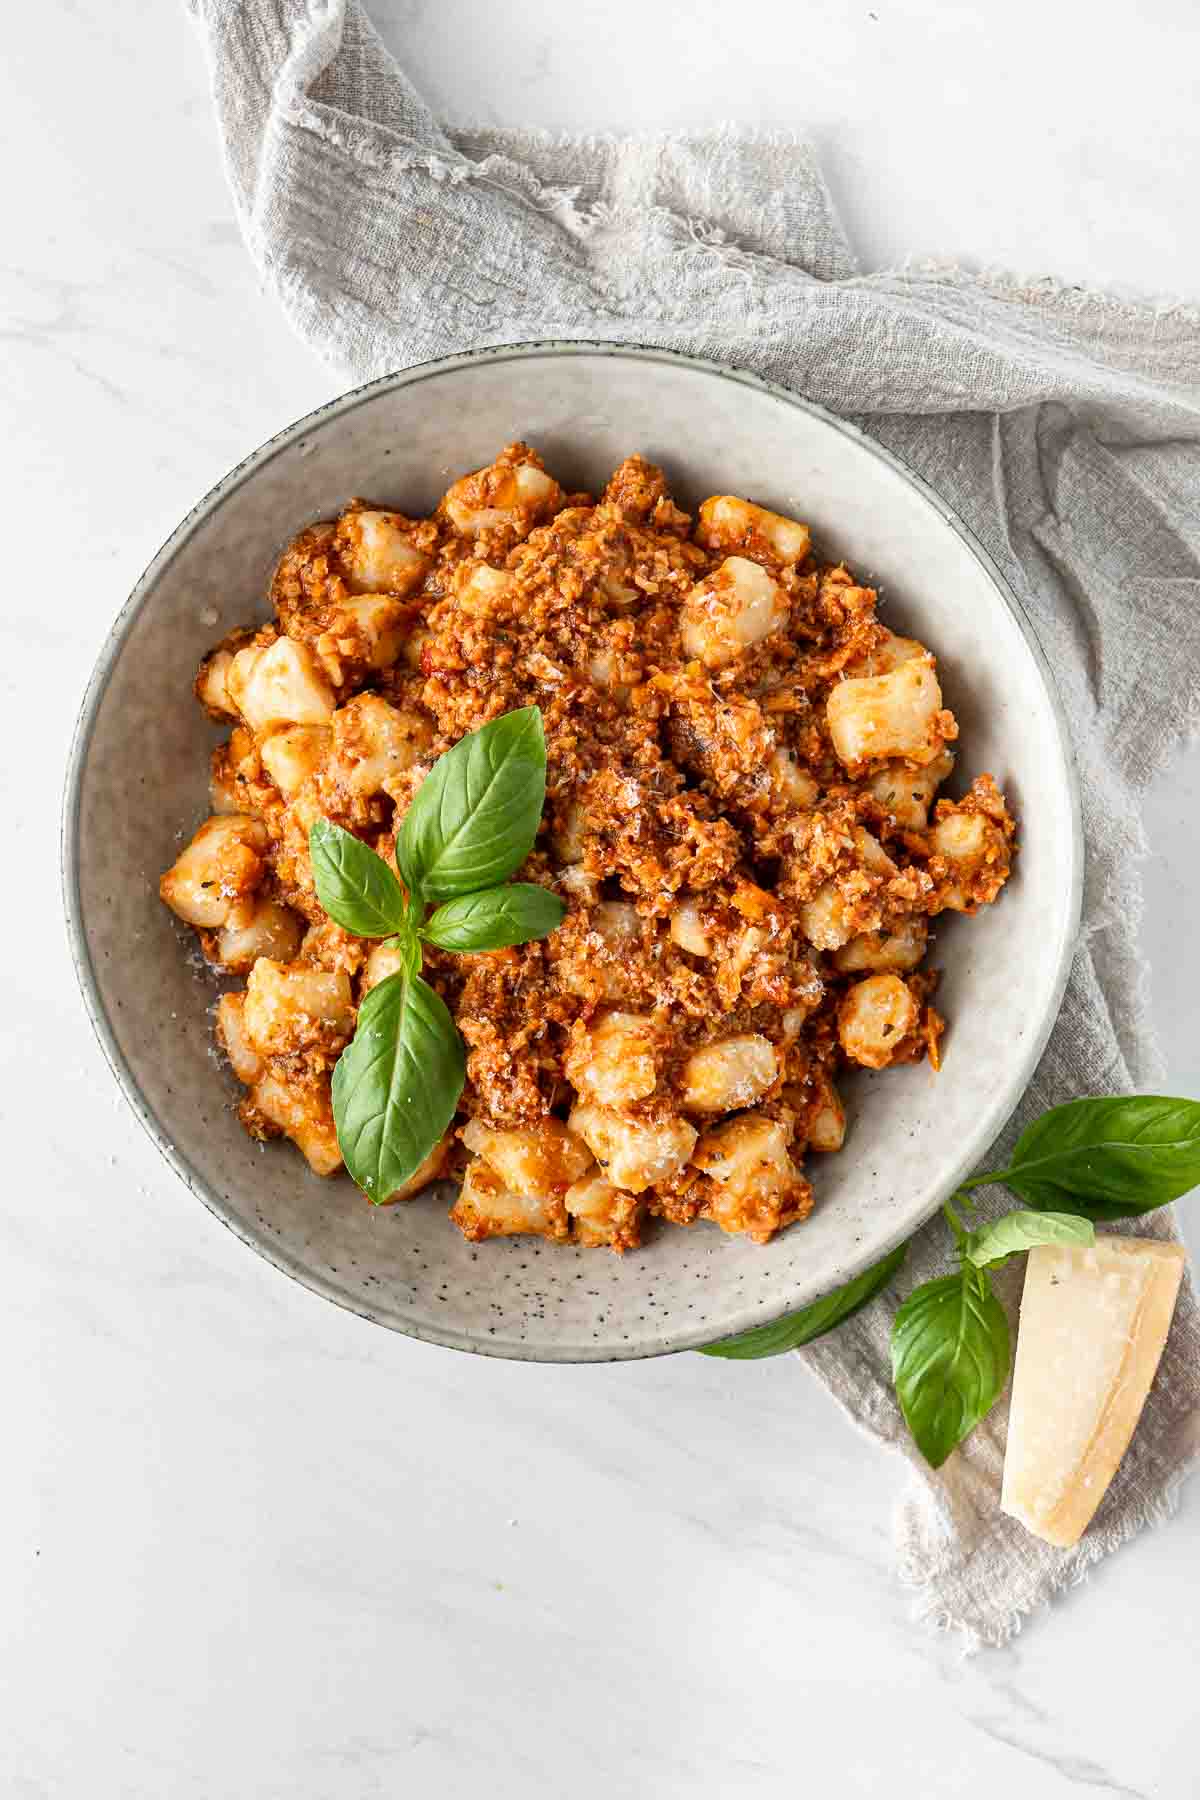 Vegetarian gnocchi bolognese in a bowl with fresh basil.